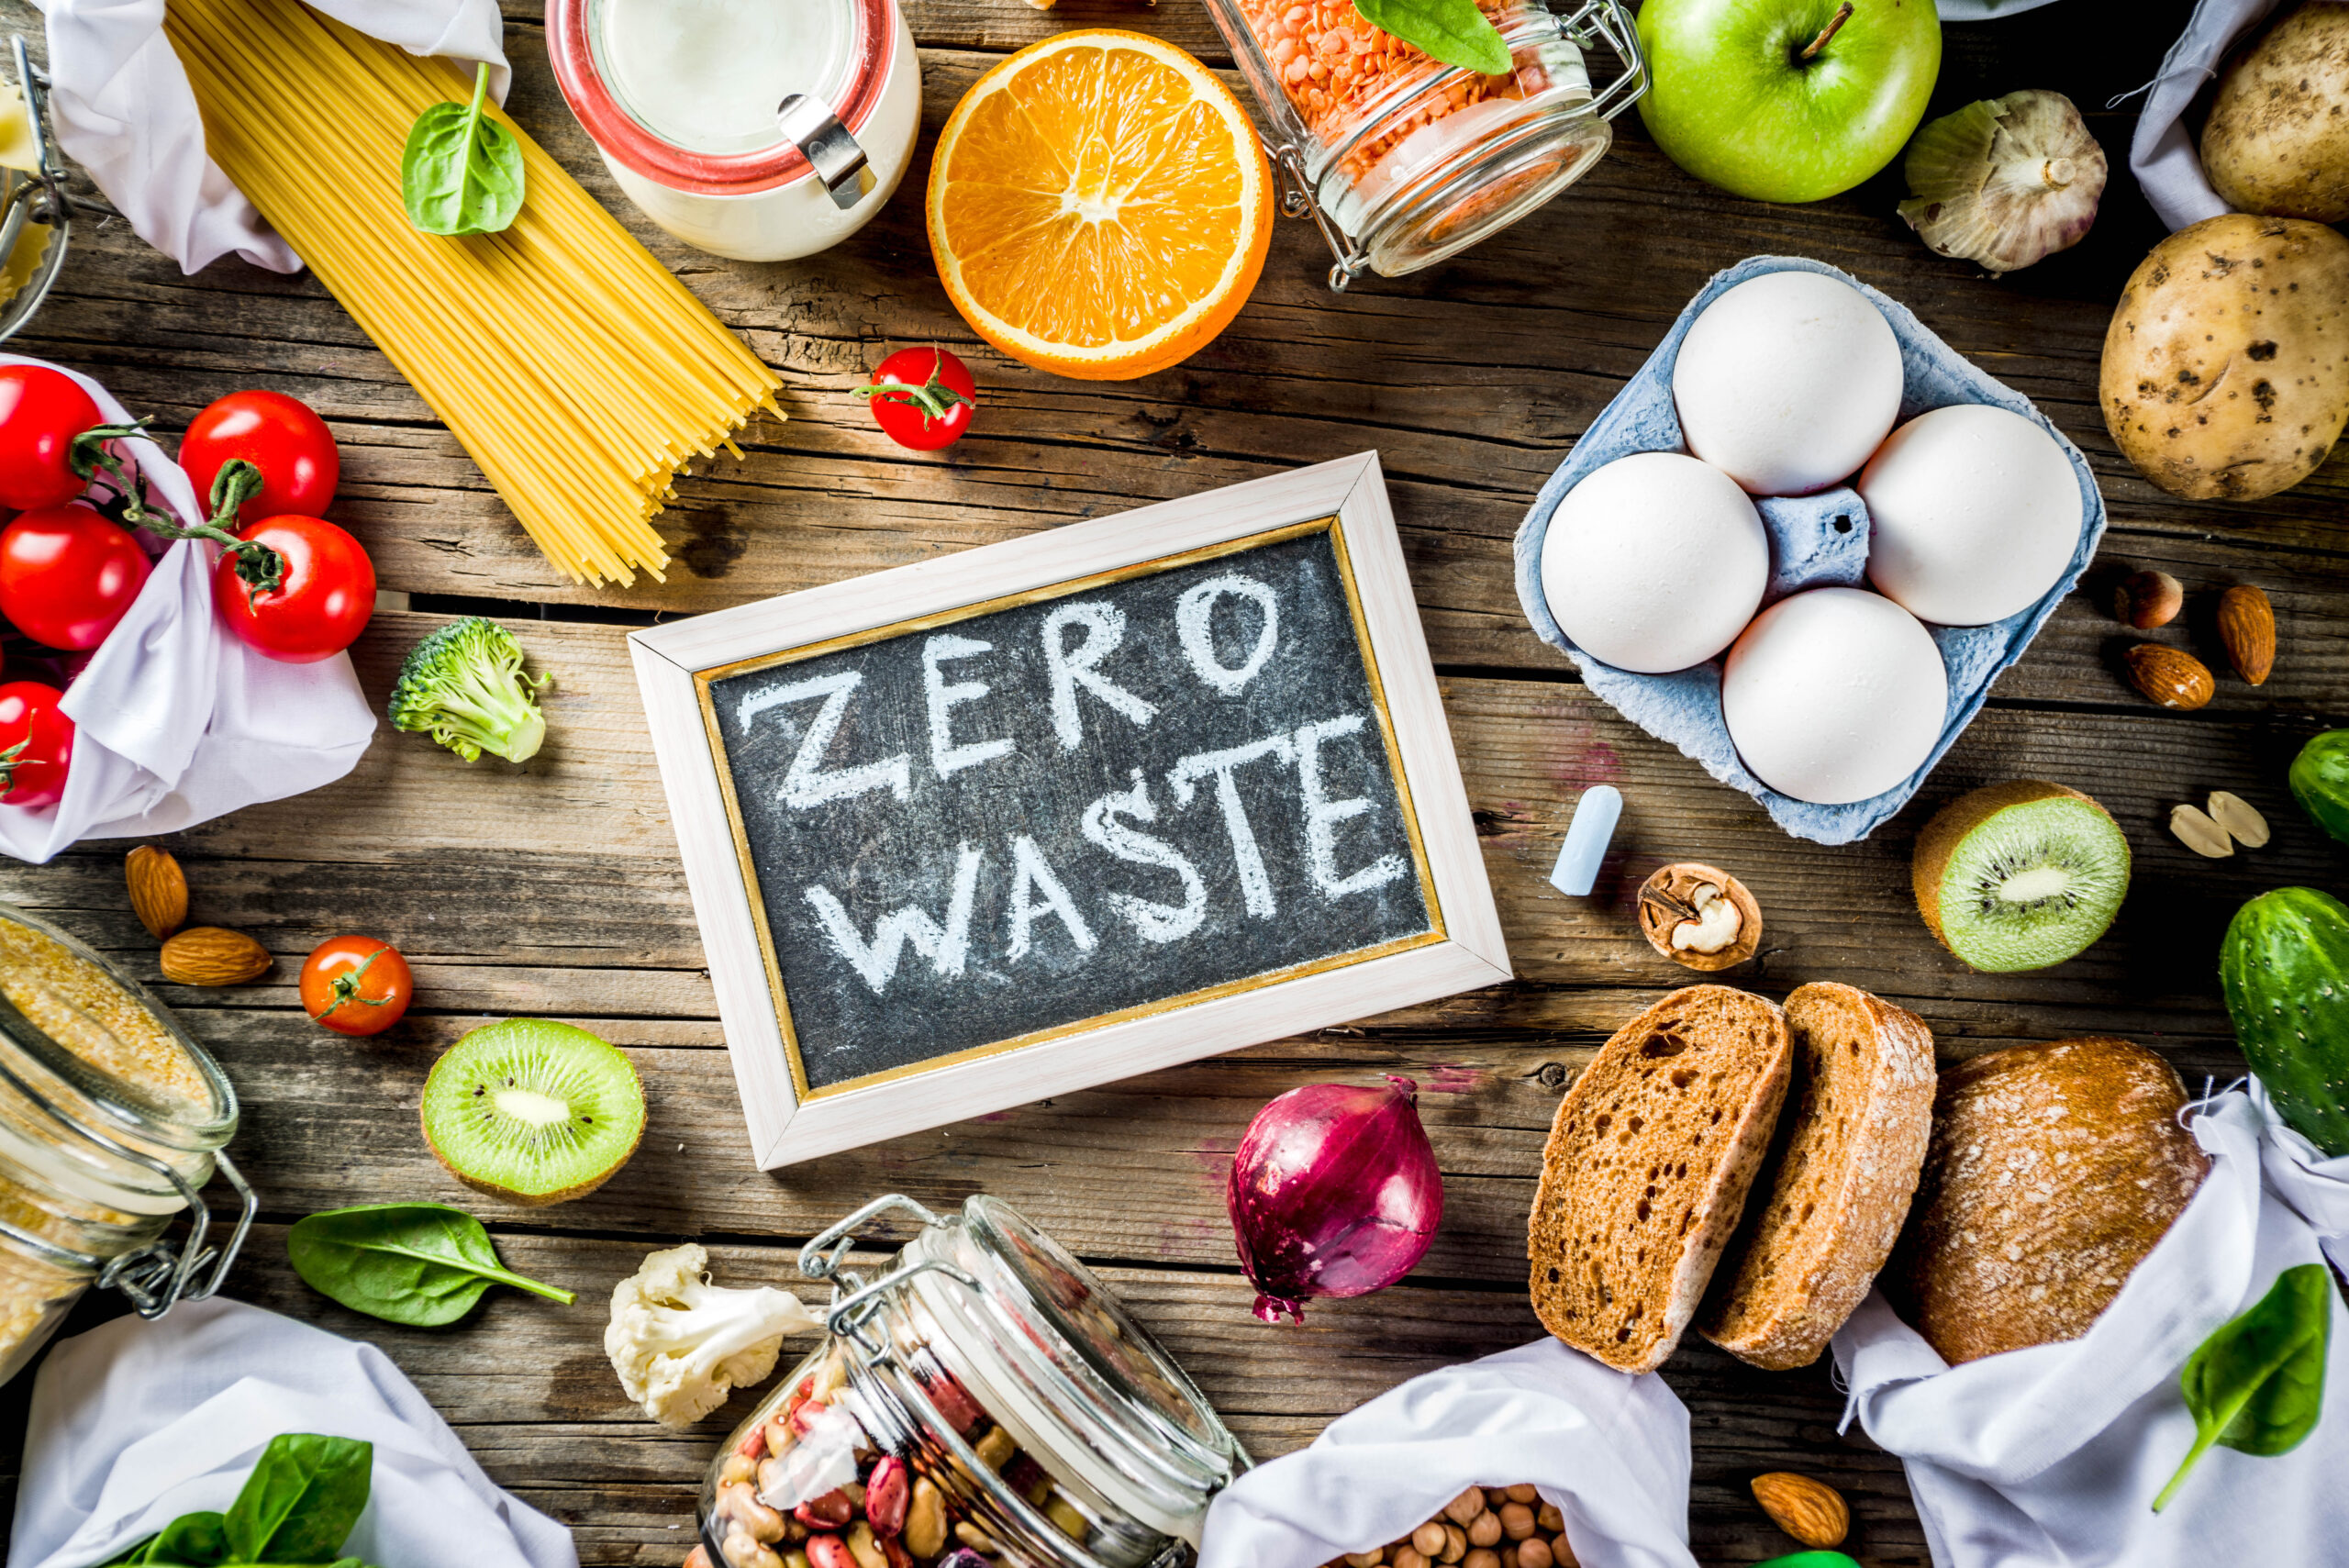 UN resolution proclaims March 30 International Day of Zero Waste Let